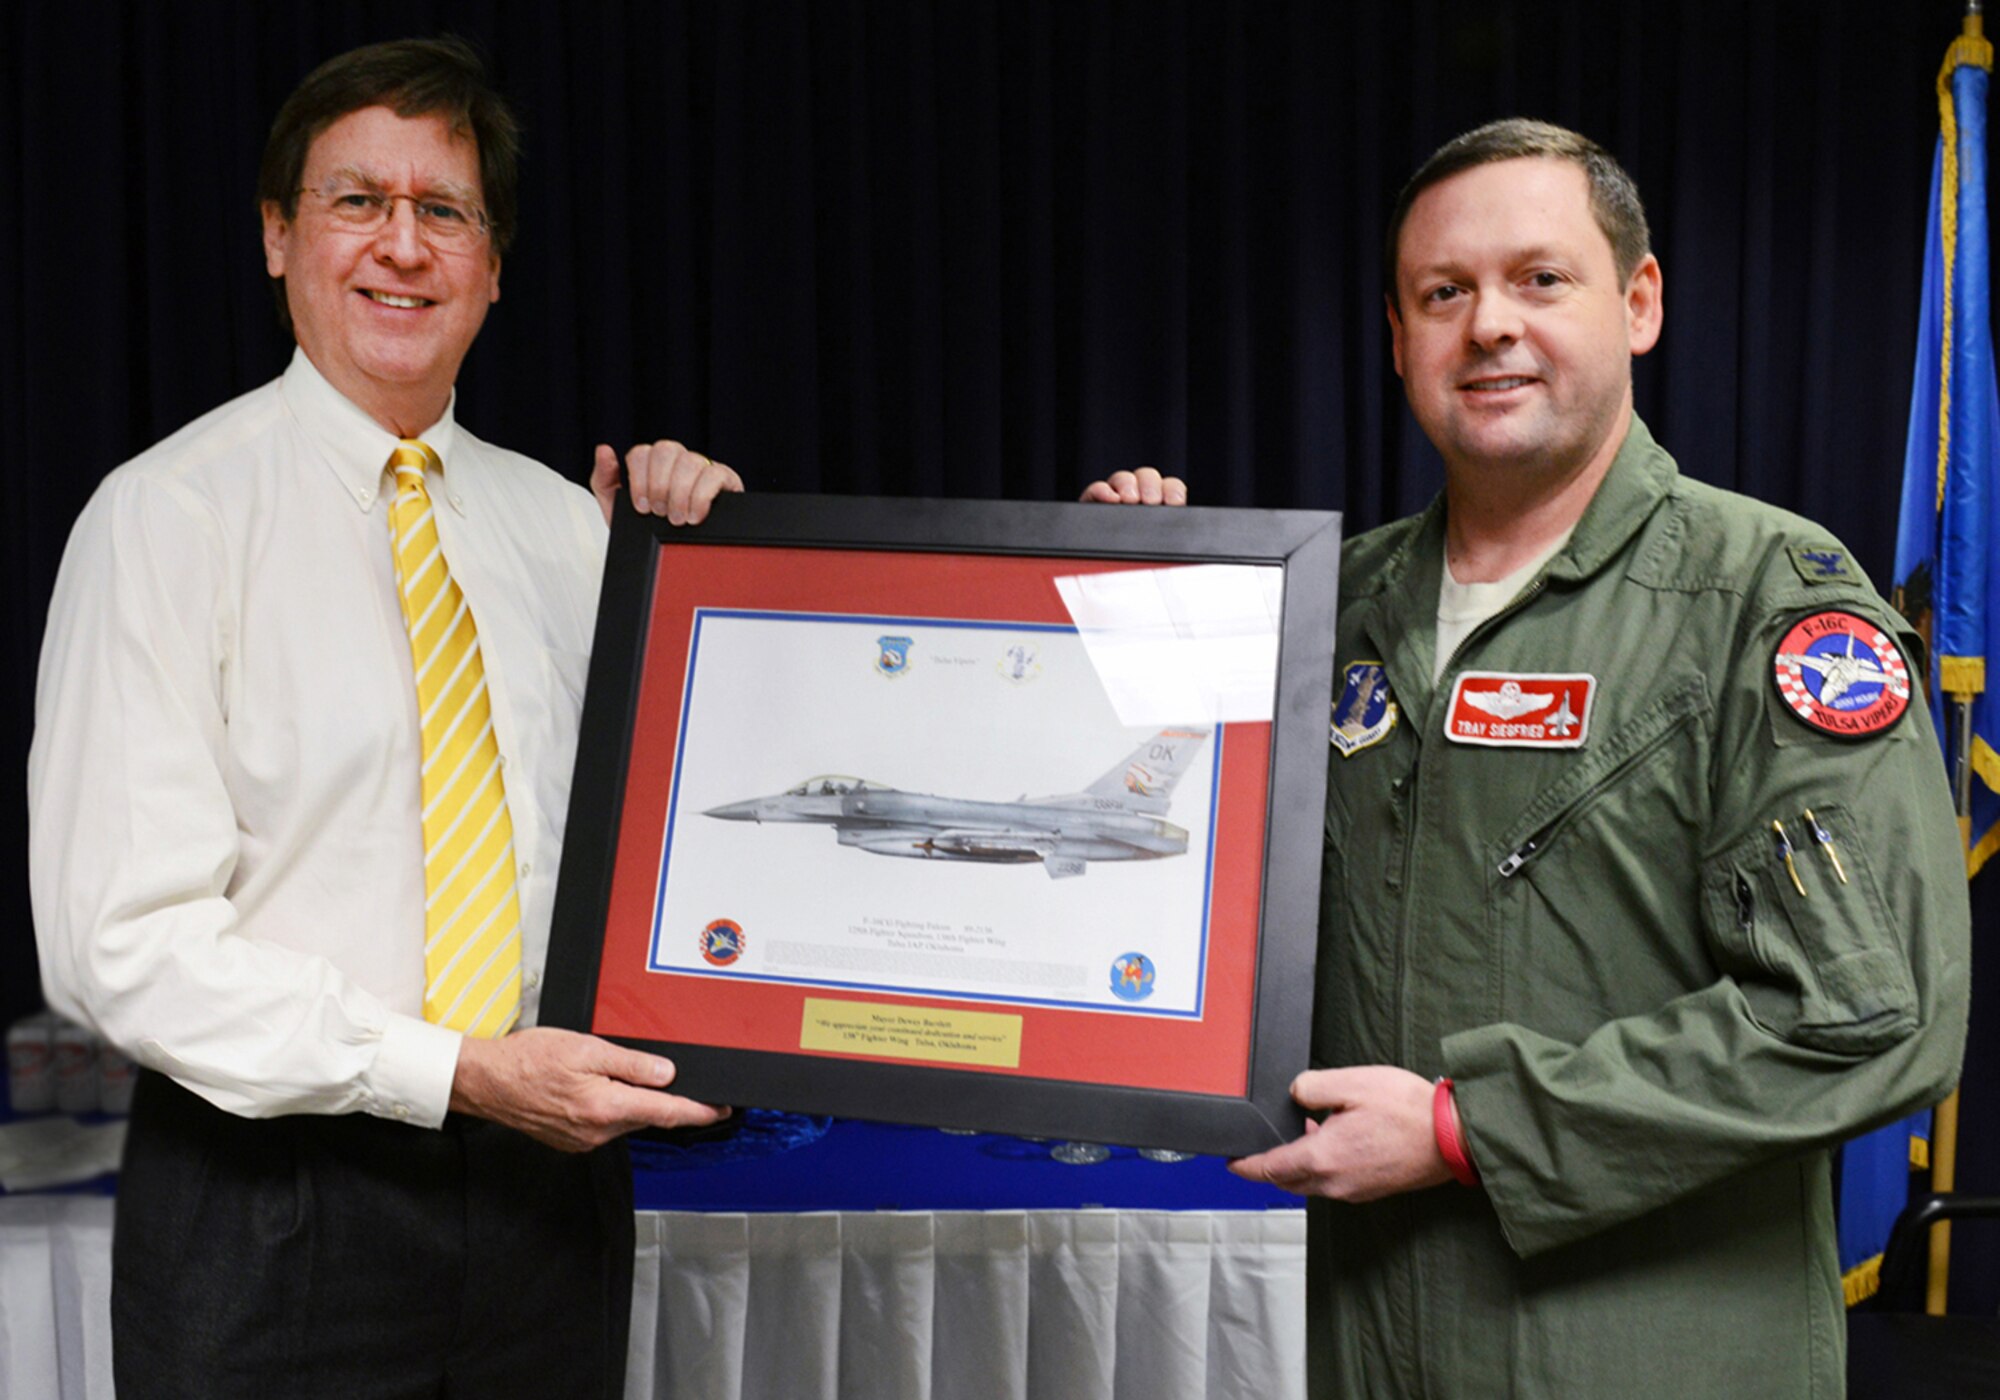 Col. Raymond Siegfried,  138th Fighter Wing vice commander presents a lithograph to Tulsa Mayor Dewey F. Bartlett, Jr. during a visit February 25, 2015 at the Tulsa Air National Guard base, Tulsa, Okla. The mayor was hosted by 138th leadership as a community outreach event aimed at fostering good relations and educating local leaders on the mission of the wing.